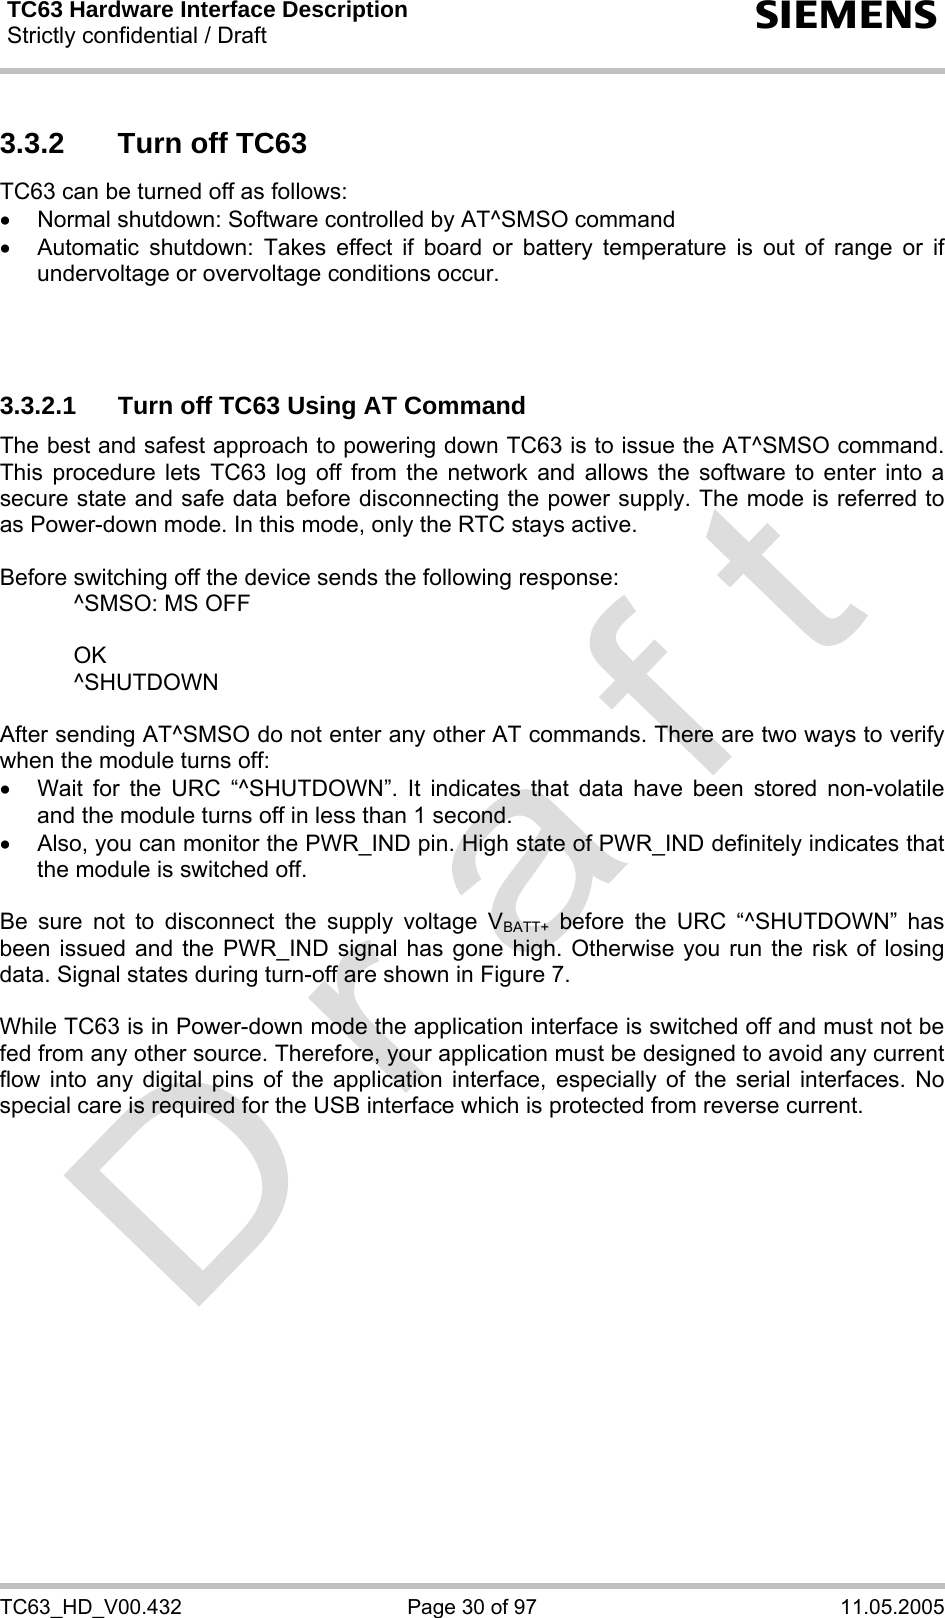 TC63 Hardware Interface Description Strictly confidential / Draft  s TC63_HD_V00.432  Page 30 of 97  11.05.2005 3.3.2  Turn off TC63 TC63 can be turned off as follows: •  Normal shutdown: Software controlled by AT^SMSO command •  Automatic shutdown: Takes effect if board or battery temperature is out of range or if undervoltage or overvoltage conditions occur.    3.3.2.1  Turn off TC63 Using AT Command The best and safest approach to powering down TC63 is to issue the AT^SMSO command. This procedure lets TC63 log off from the network and allows the software to enter into a secure state and safe data before disconnecting the power supply. The mode is referred to as Power-down mode. In this mode, only the RTC stays active.  Before switching off the device sends the following response:     ^SMSO: MS OFF    OK   ^SHUTDOWN  After sending AT^SMSO do not enter any other AT commands. There are two ways to verify when the module turns off:  •  Wait for the URC “^SHUTDOWN”. It indicates that data have been stored non-volatile and the module turns off in less than 1 second. •  Also, you can monitor the PWR_IND pin. High state of PWR_IND definitely indicates that the module is switched off.  Be sure not to disconnect the supply voltage VBATT+ before the URC “^SHUTDOWN” has been issued and the PWR_IND signal has gone high. Otherwise you run the risk of losing data. Signal states during turn-off are shown in Figure 7.  While TC63 is in Power-down mode the application interface is switched off and must not be fed from any other source. Therefore, your application must be designed to avoid any current flow into any digital pins of the application interface, especially of the serial interfaces. No special care is required for the USB interface which is protected from reverse current.   